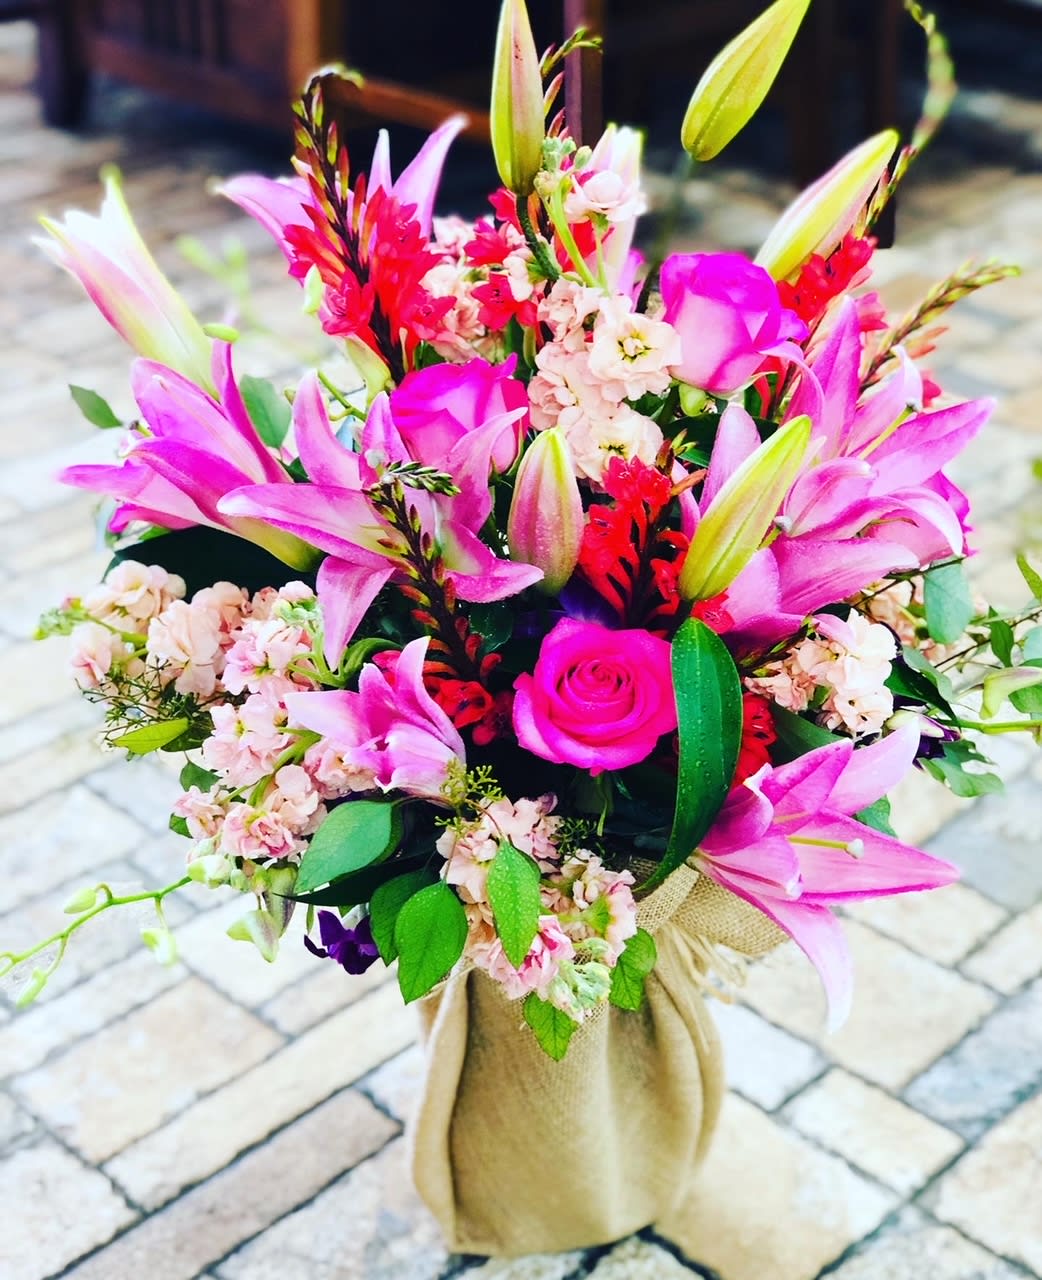 Vision of Love  - A large mix of assorted pink flowers including, lilies, roses and other seasonal flowers. Let that special someone in your life know that they are your true vision of love. 